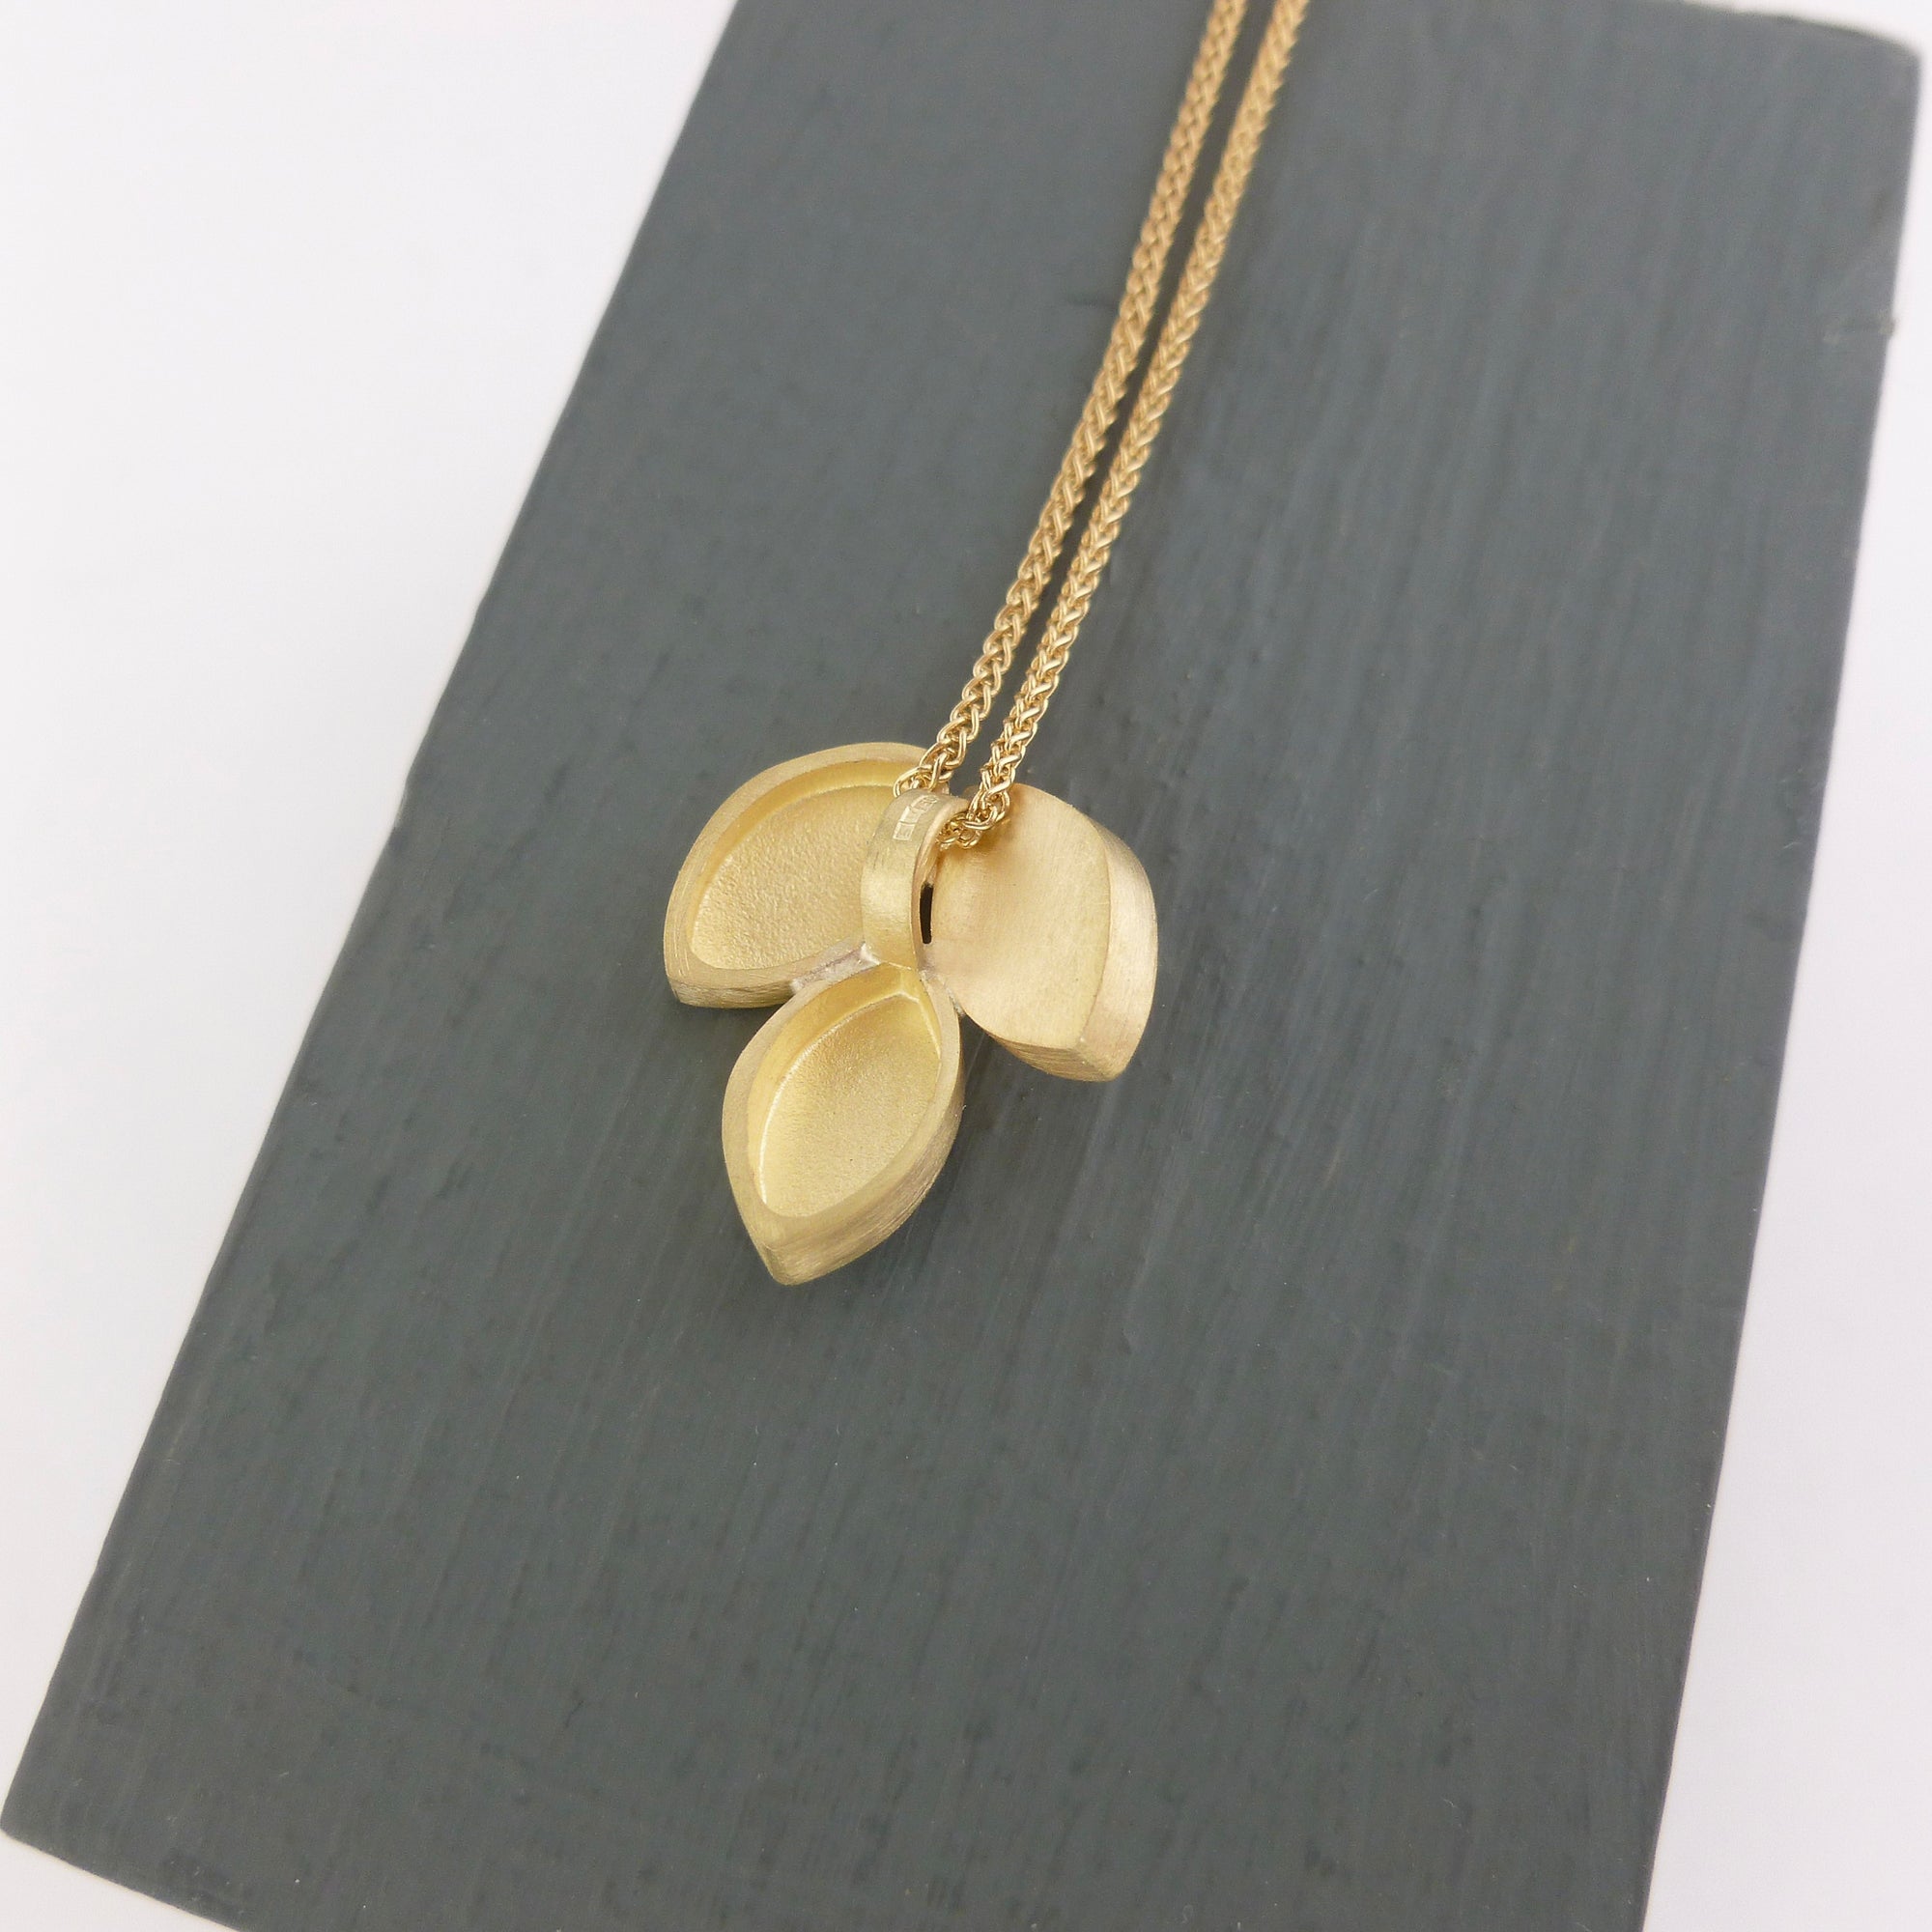 Modern and simple yellow gold leaf contemporary necklace handmade by Sue Lane UK